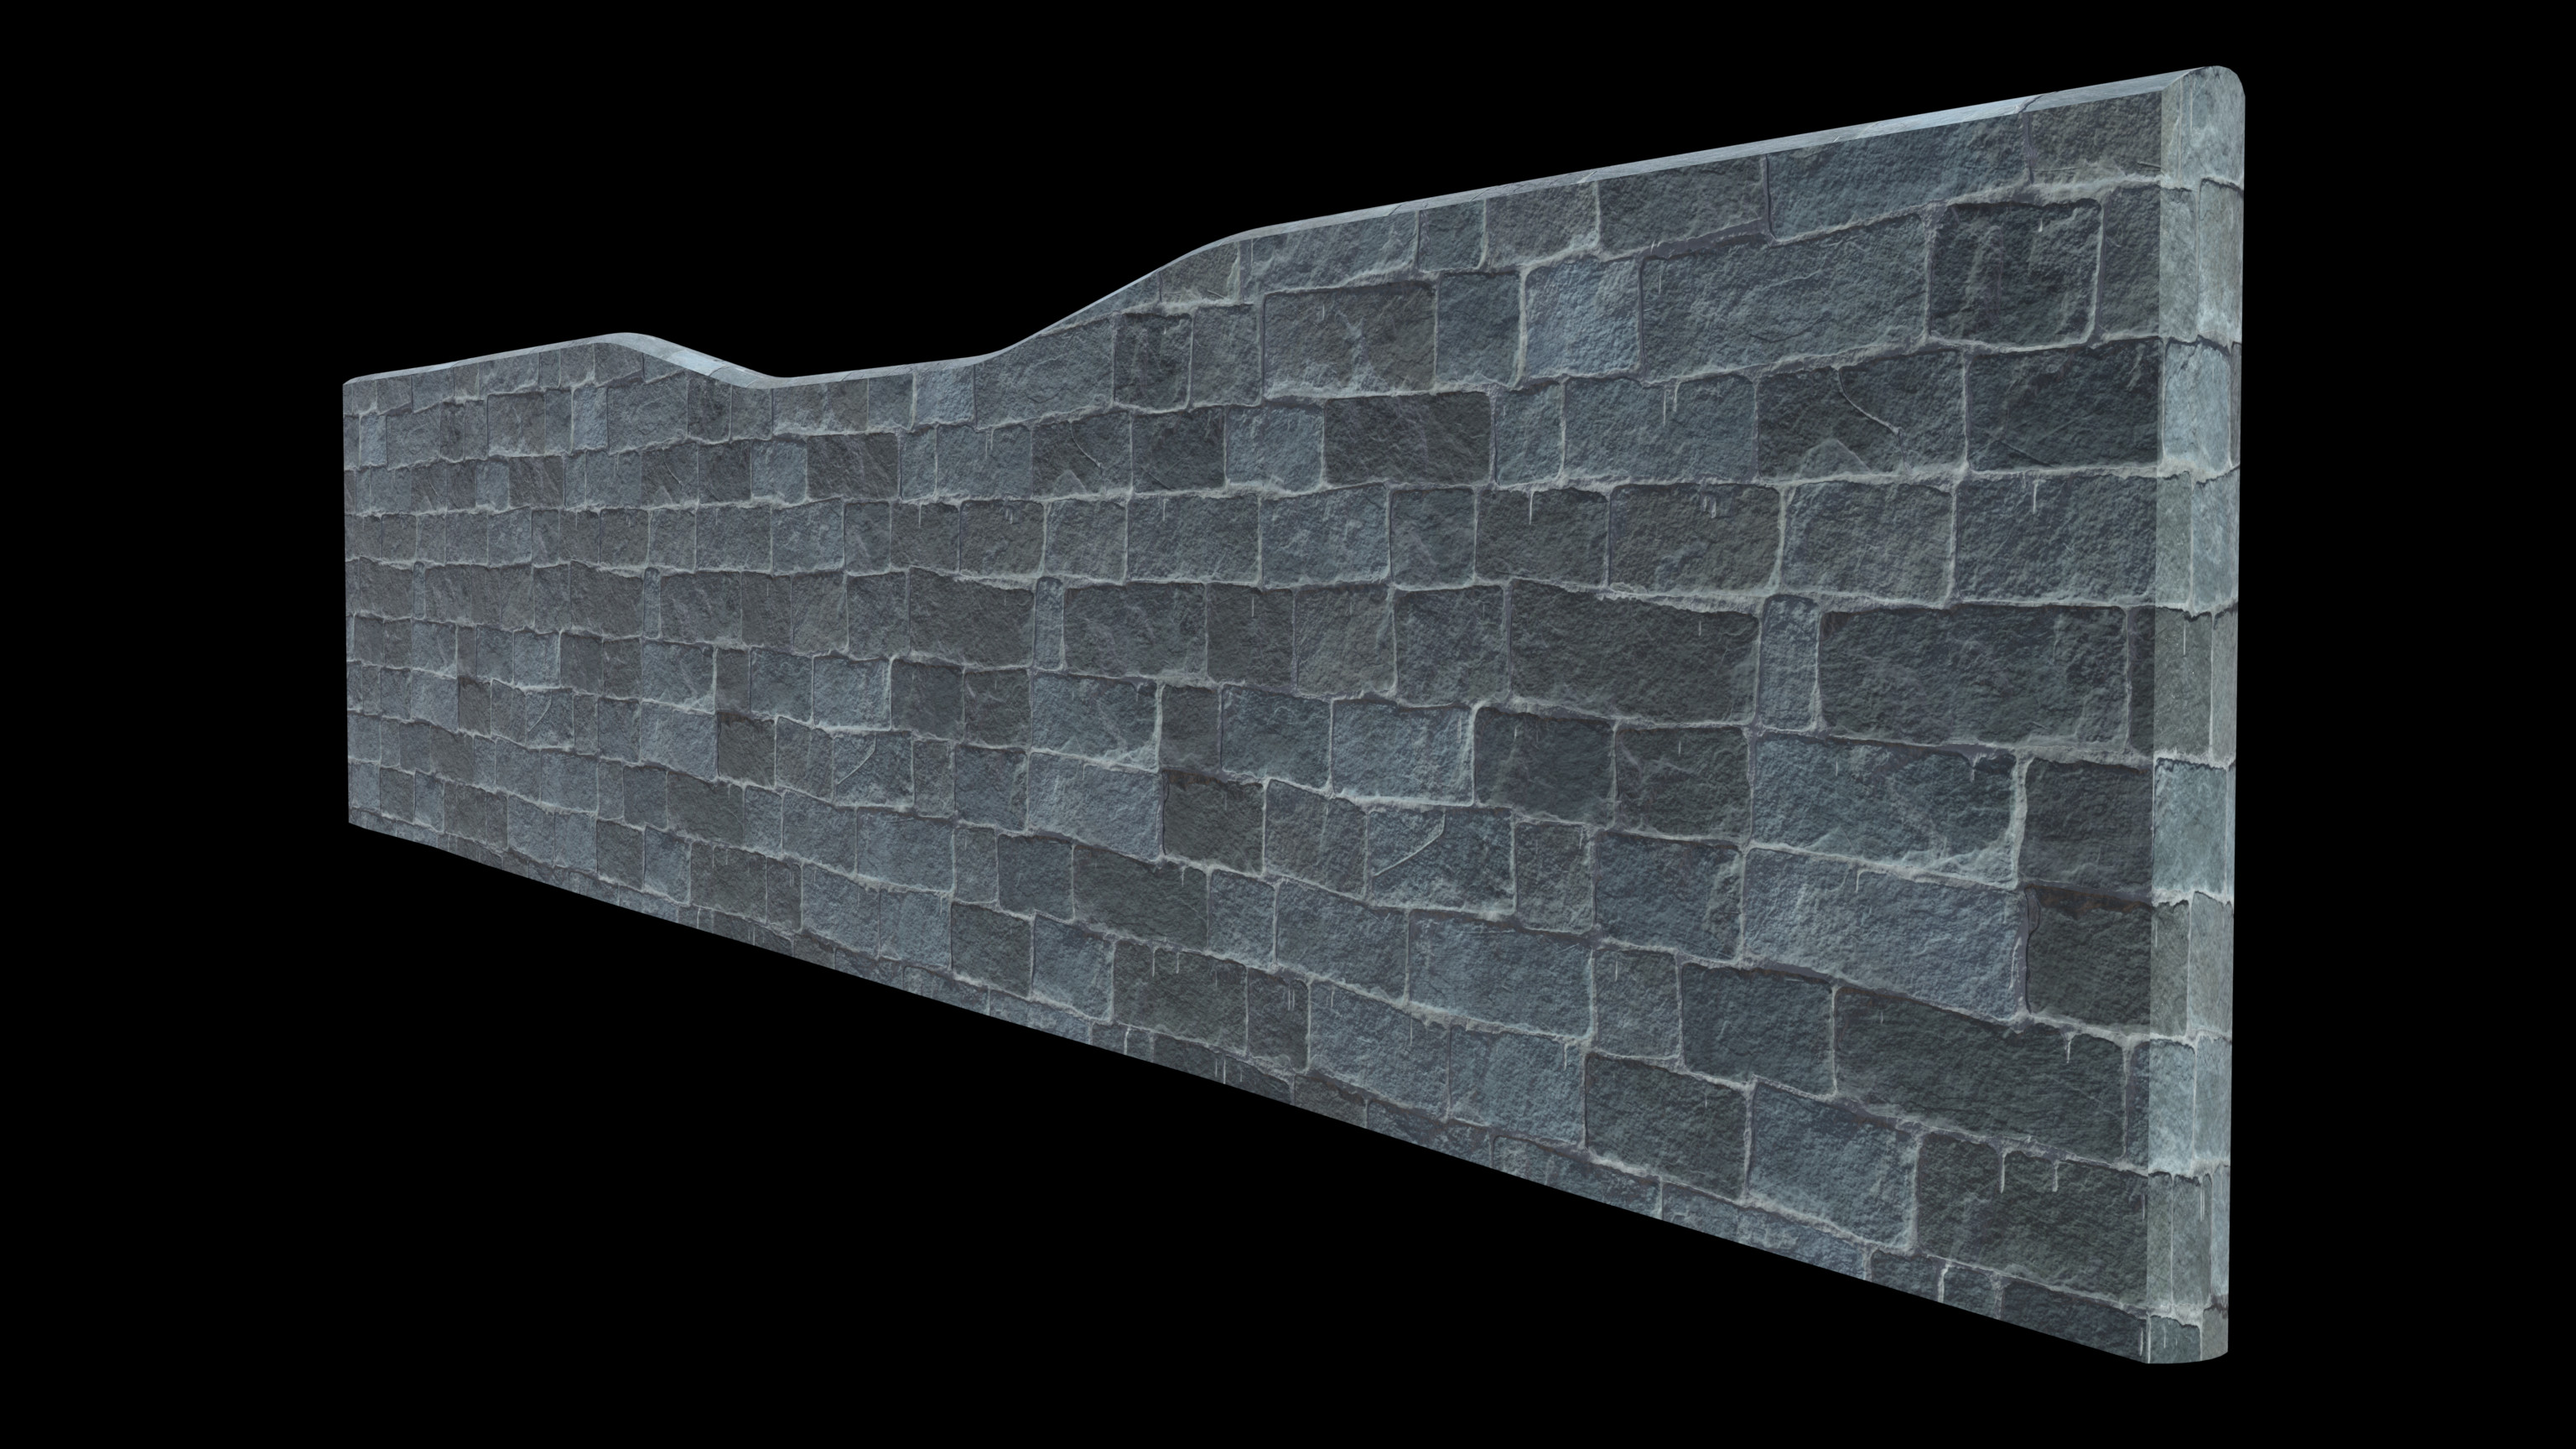 This is a quick example of how some of the newly developed materials render out